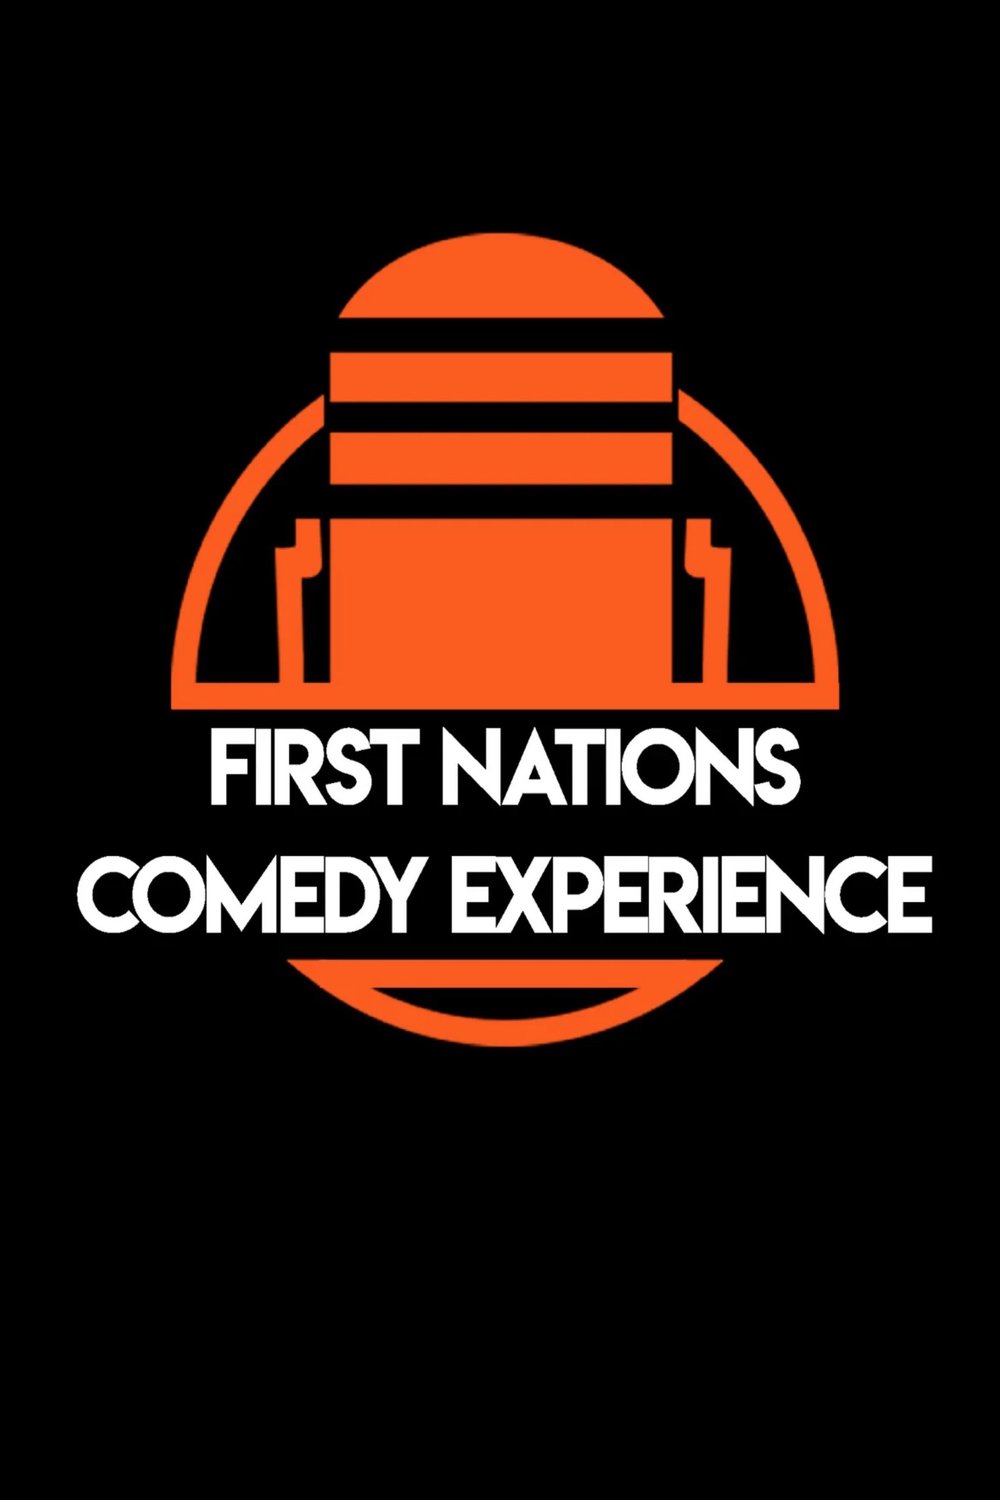 L'affiche du film First Nations Comedy Experience